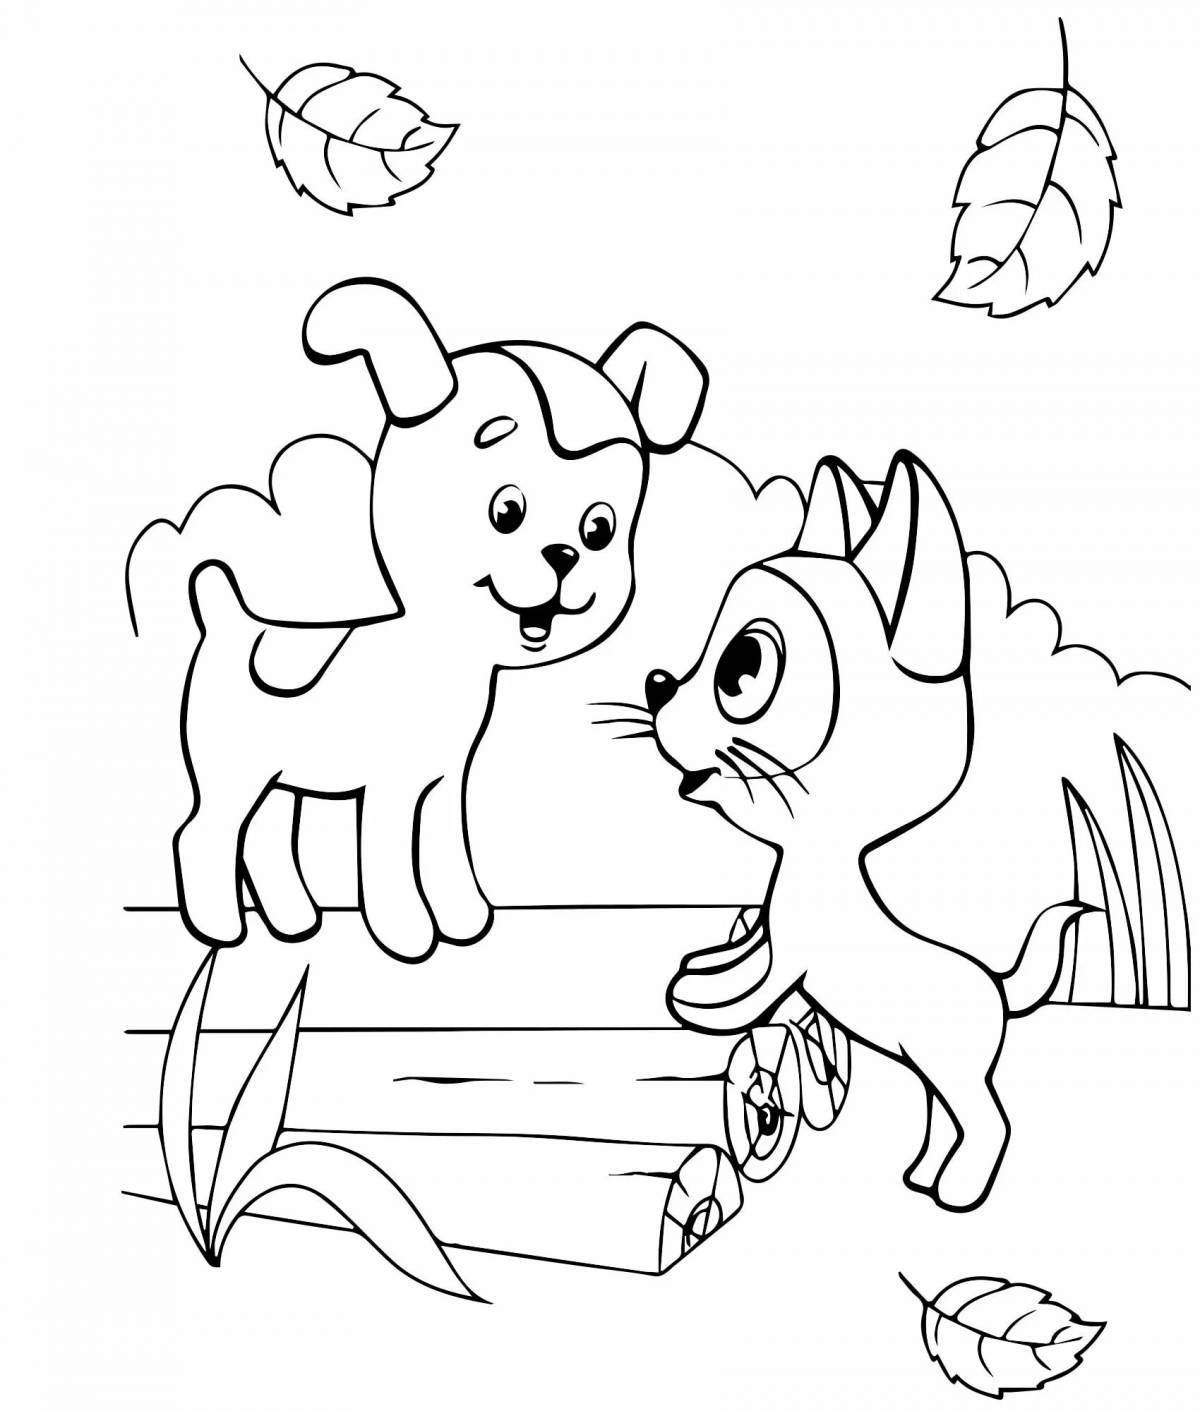 Fancy cats and dogs coloring page